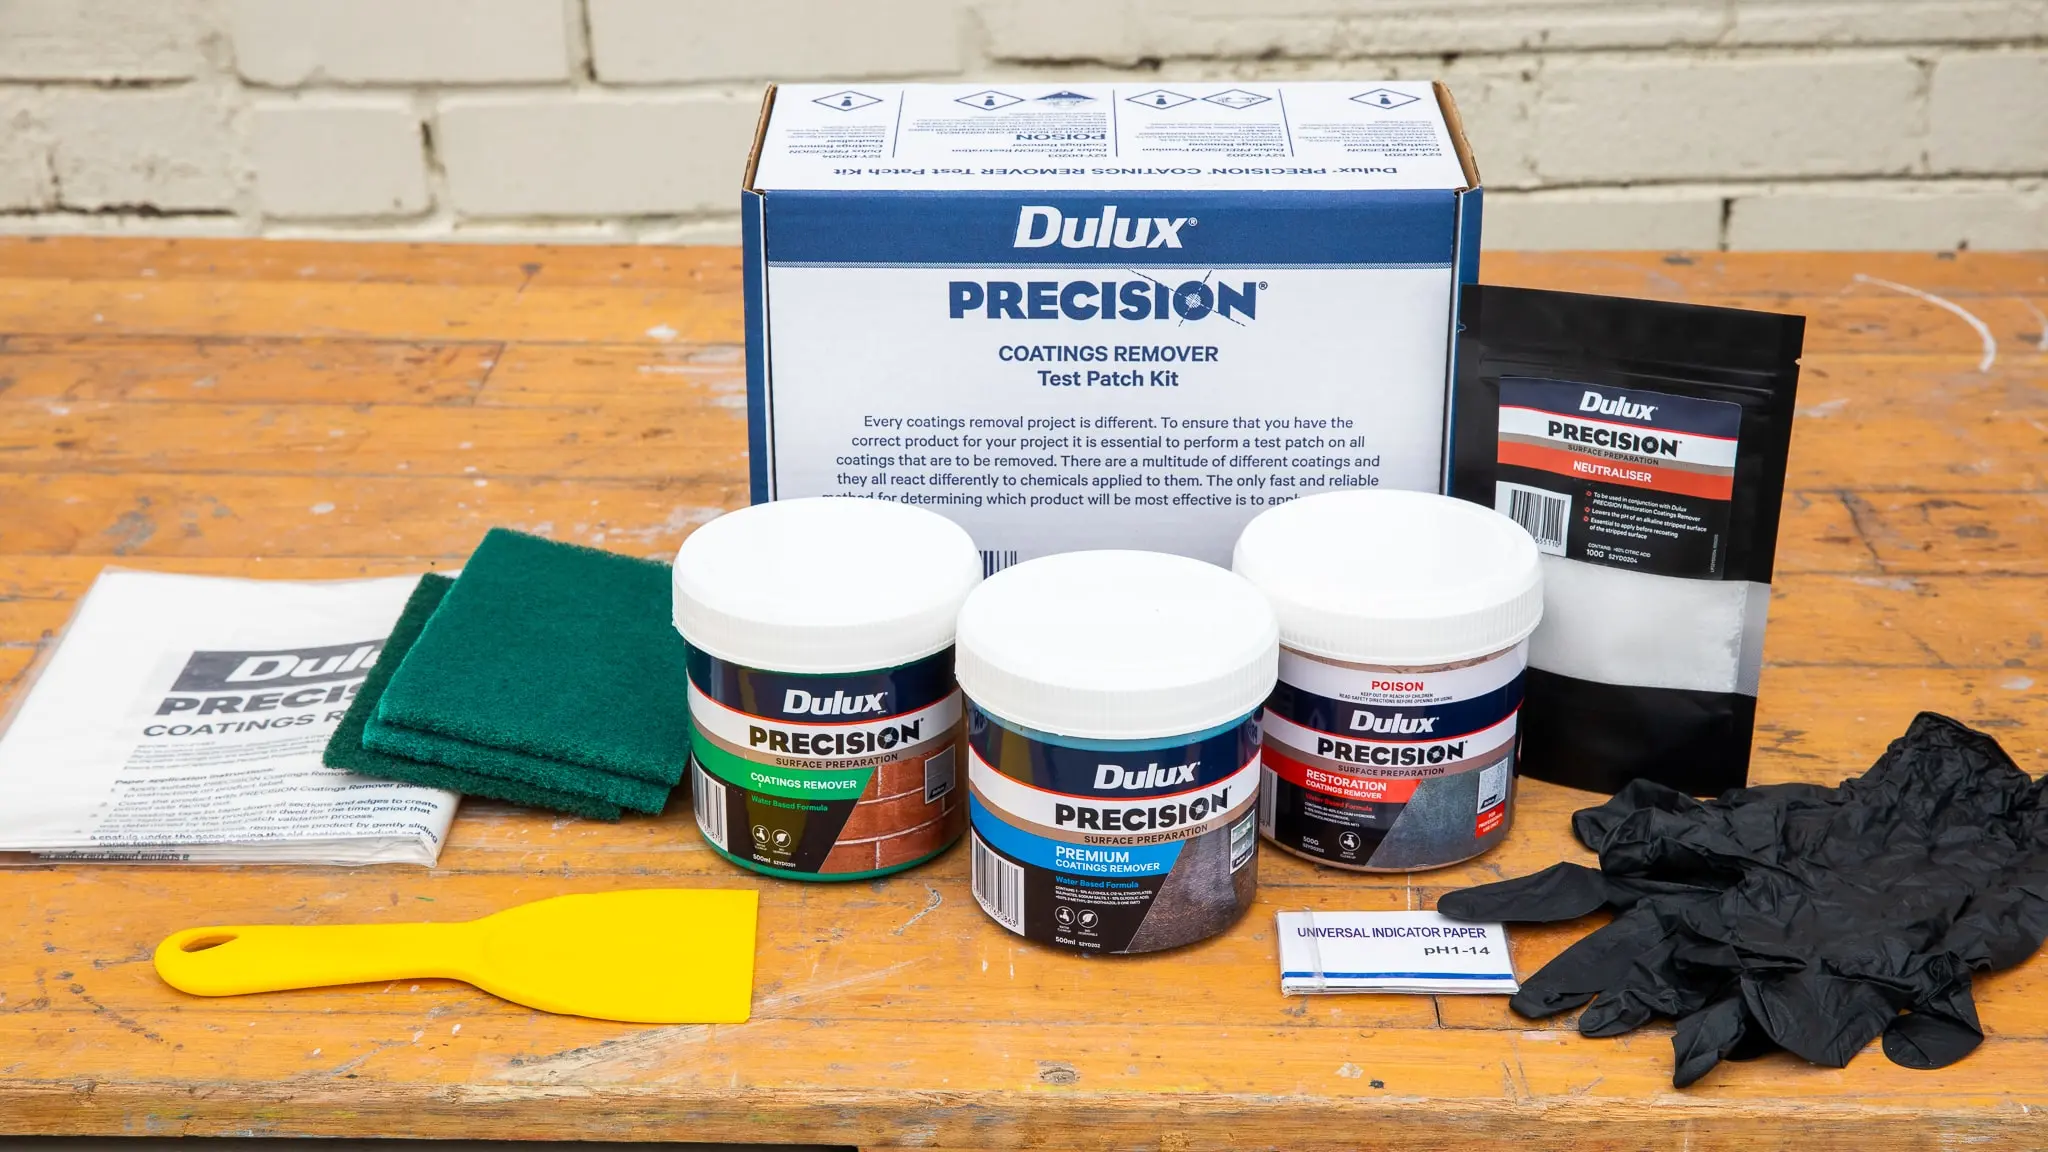 Dulux PRECISION® Coatings Remover Test Patch Kit